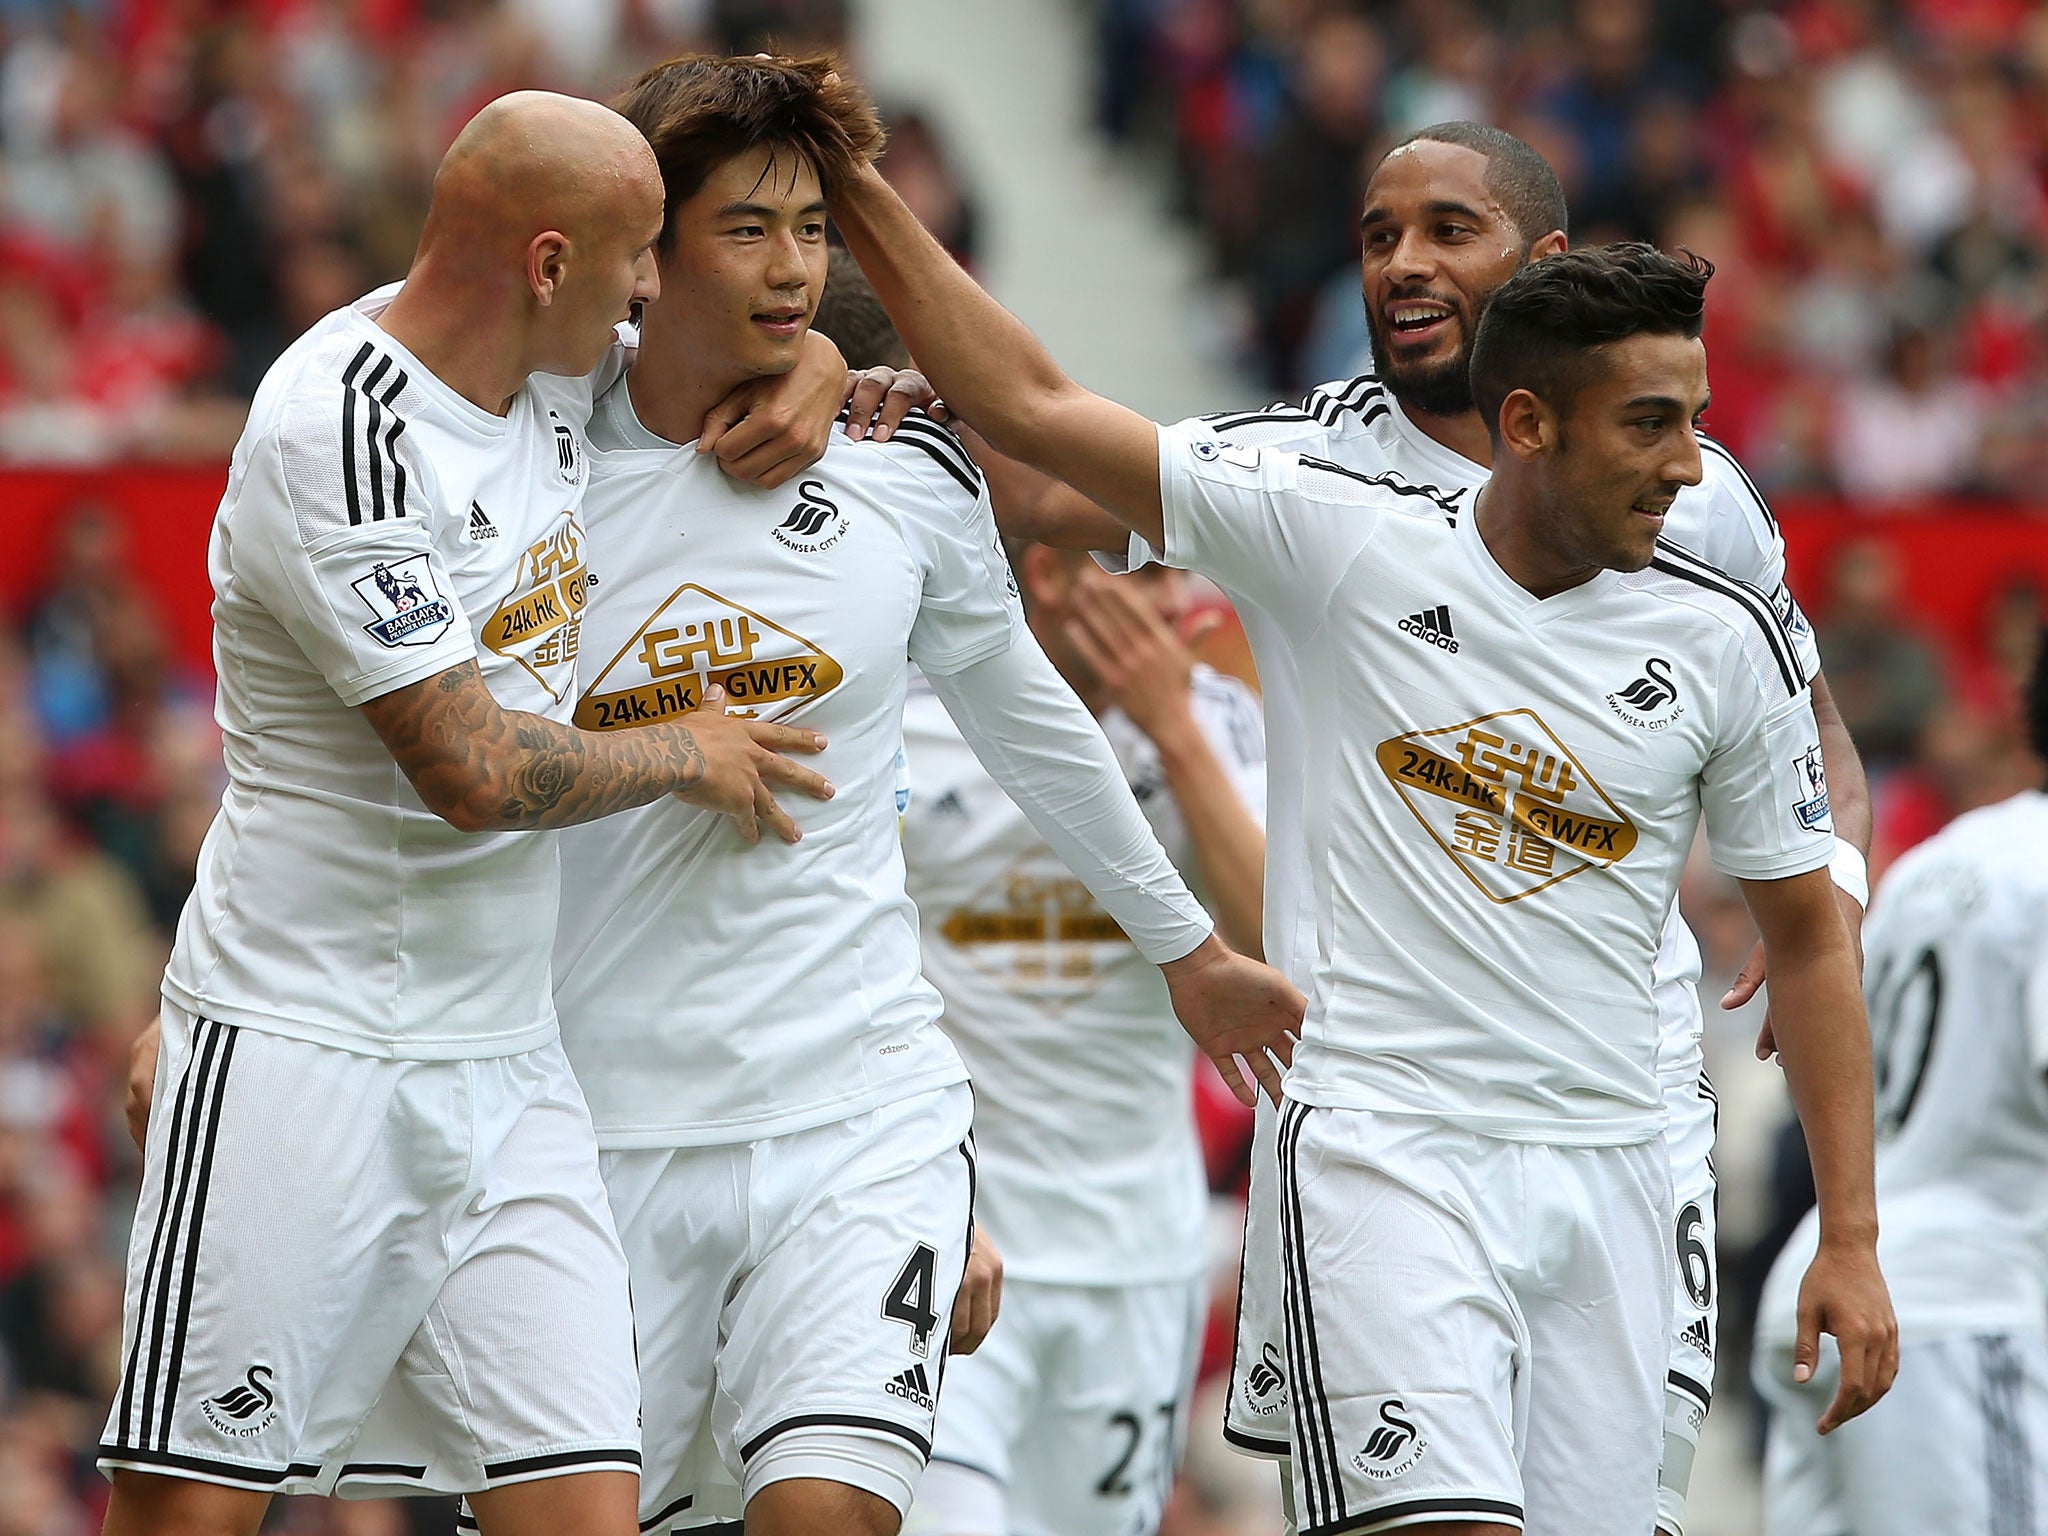 Ki-Sung-Yeung celebrates his goal for Swansea against Manchester United last weekend